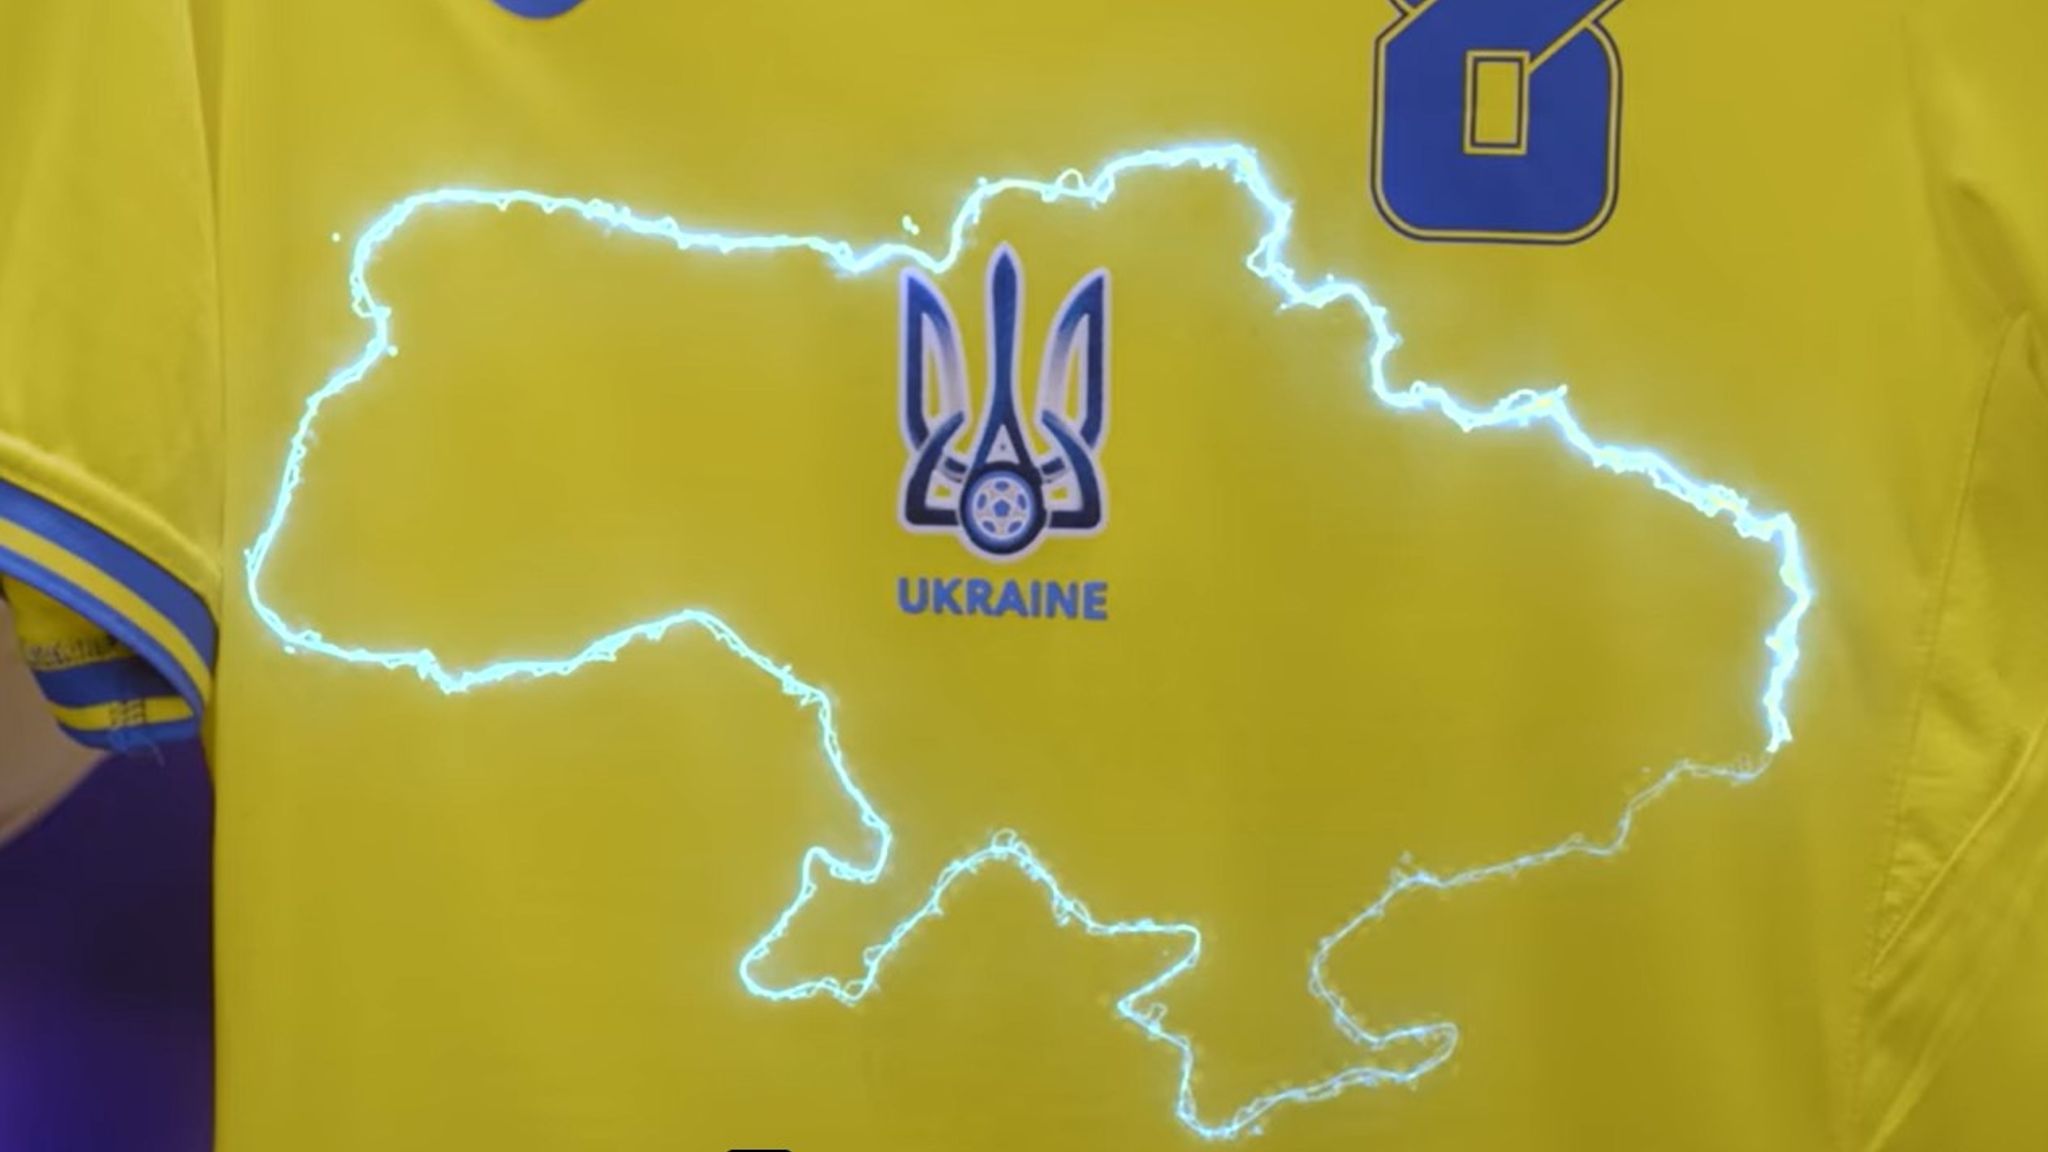 Euro 2020: Ukraine's new football kit sparks Russian outrage over map